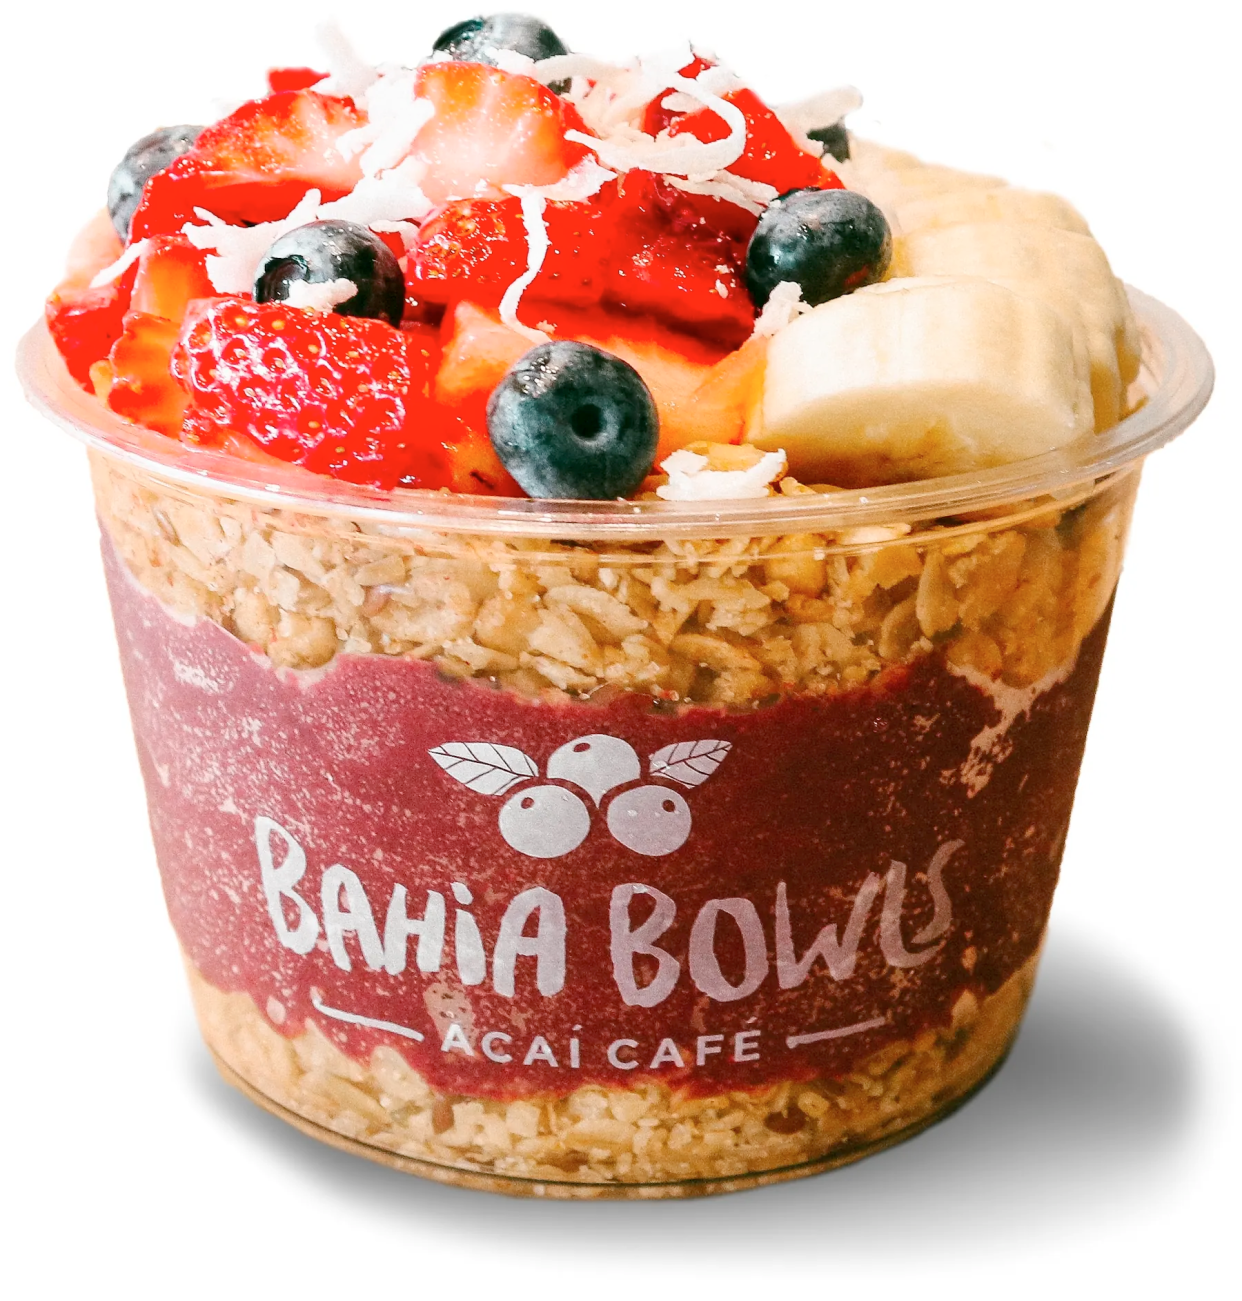 The acai bowl is one of the many signature bowls offered at Bahia Bowls in Jackson Township.